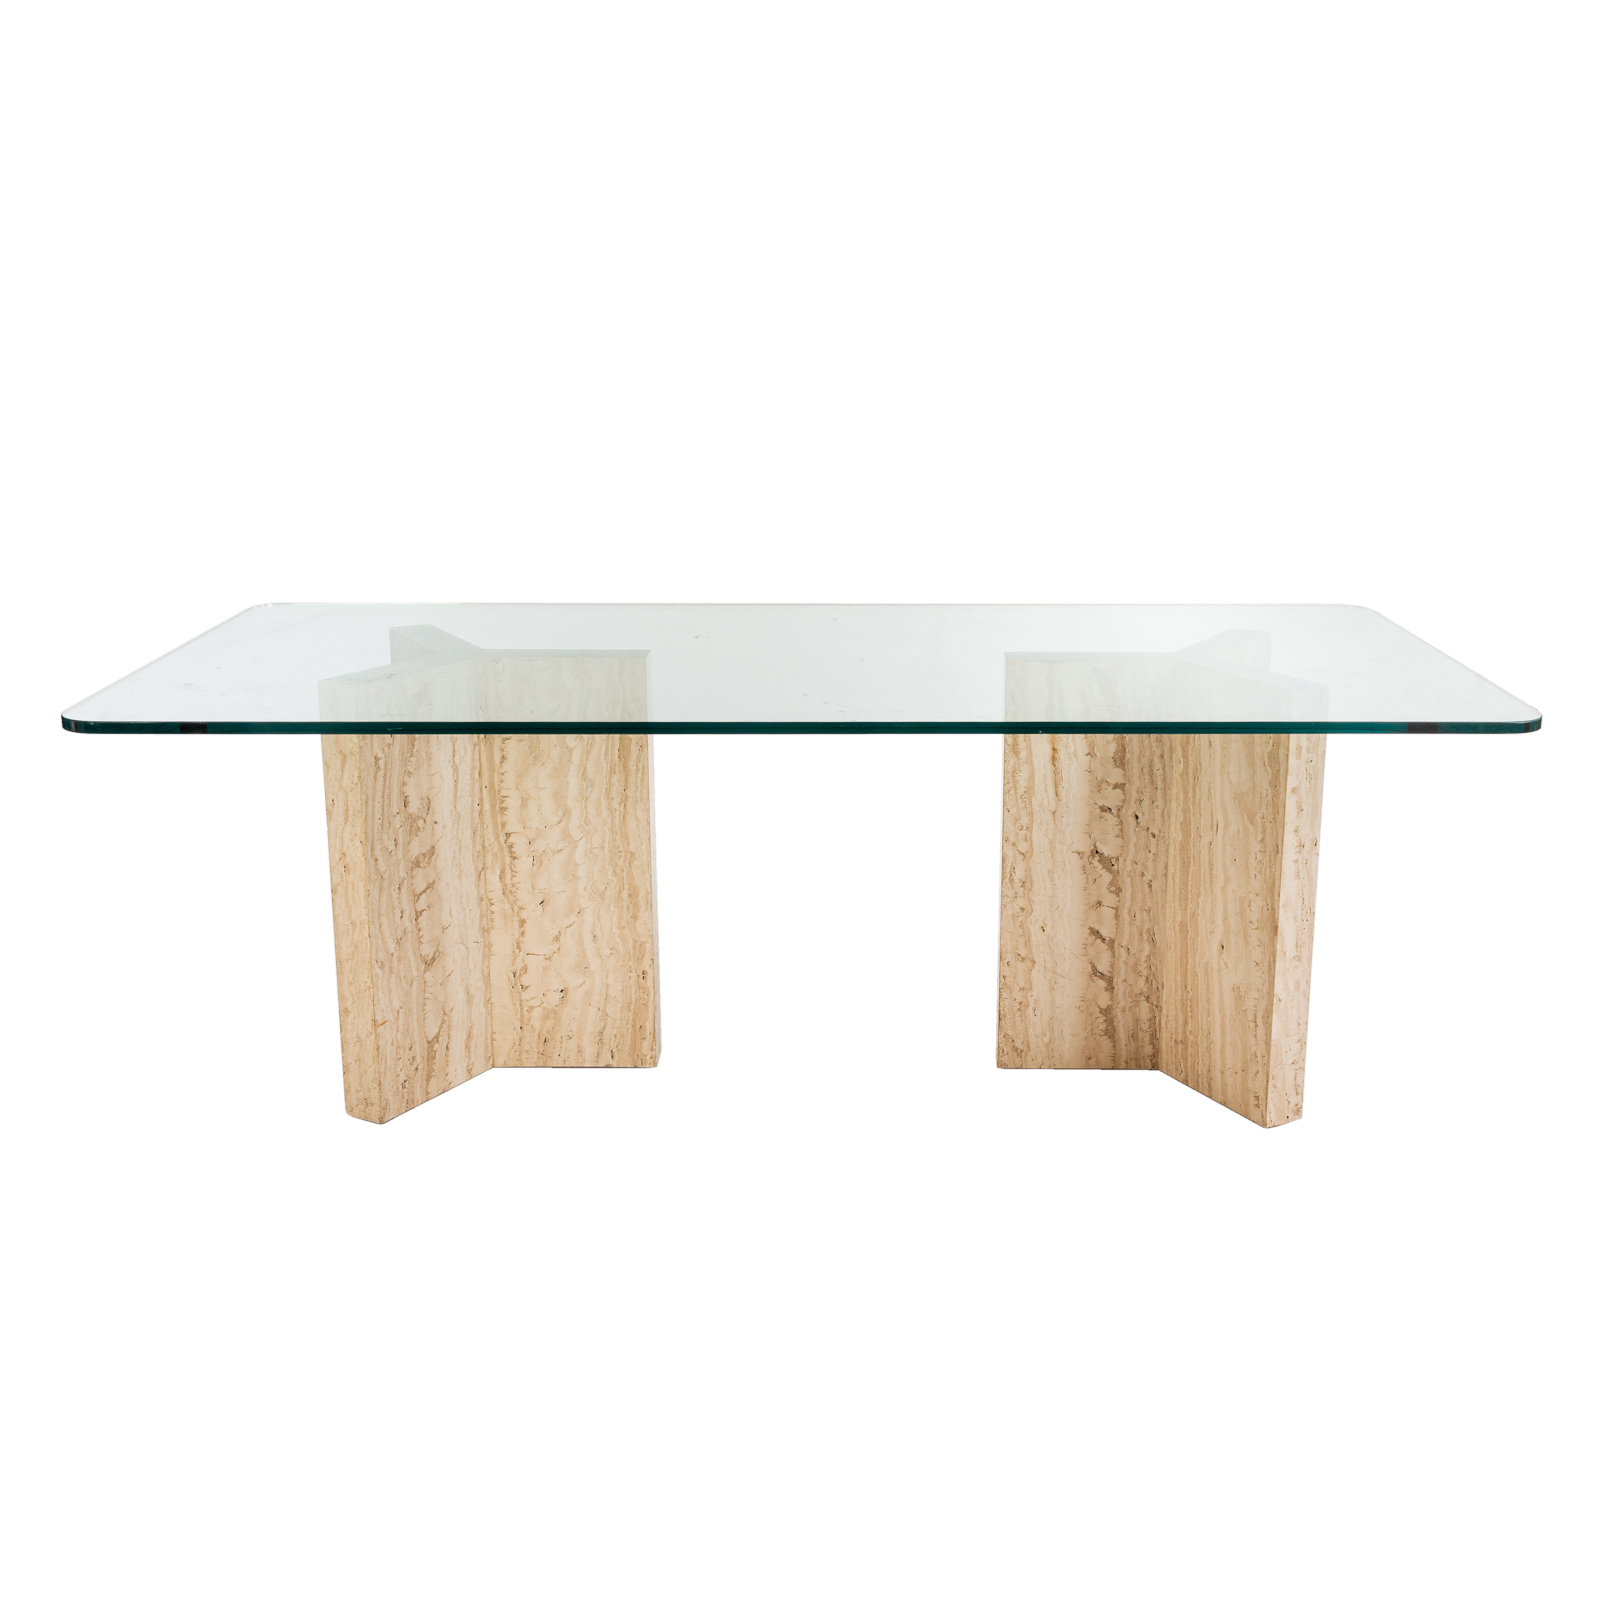 LARGE CONTEMPORARY GLASS TOP TABLE 36ac53